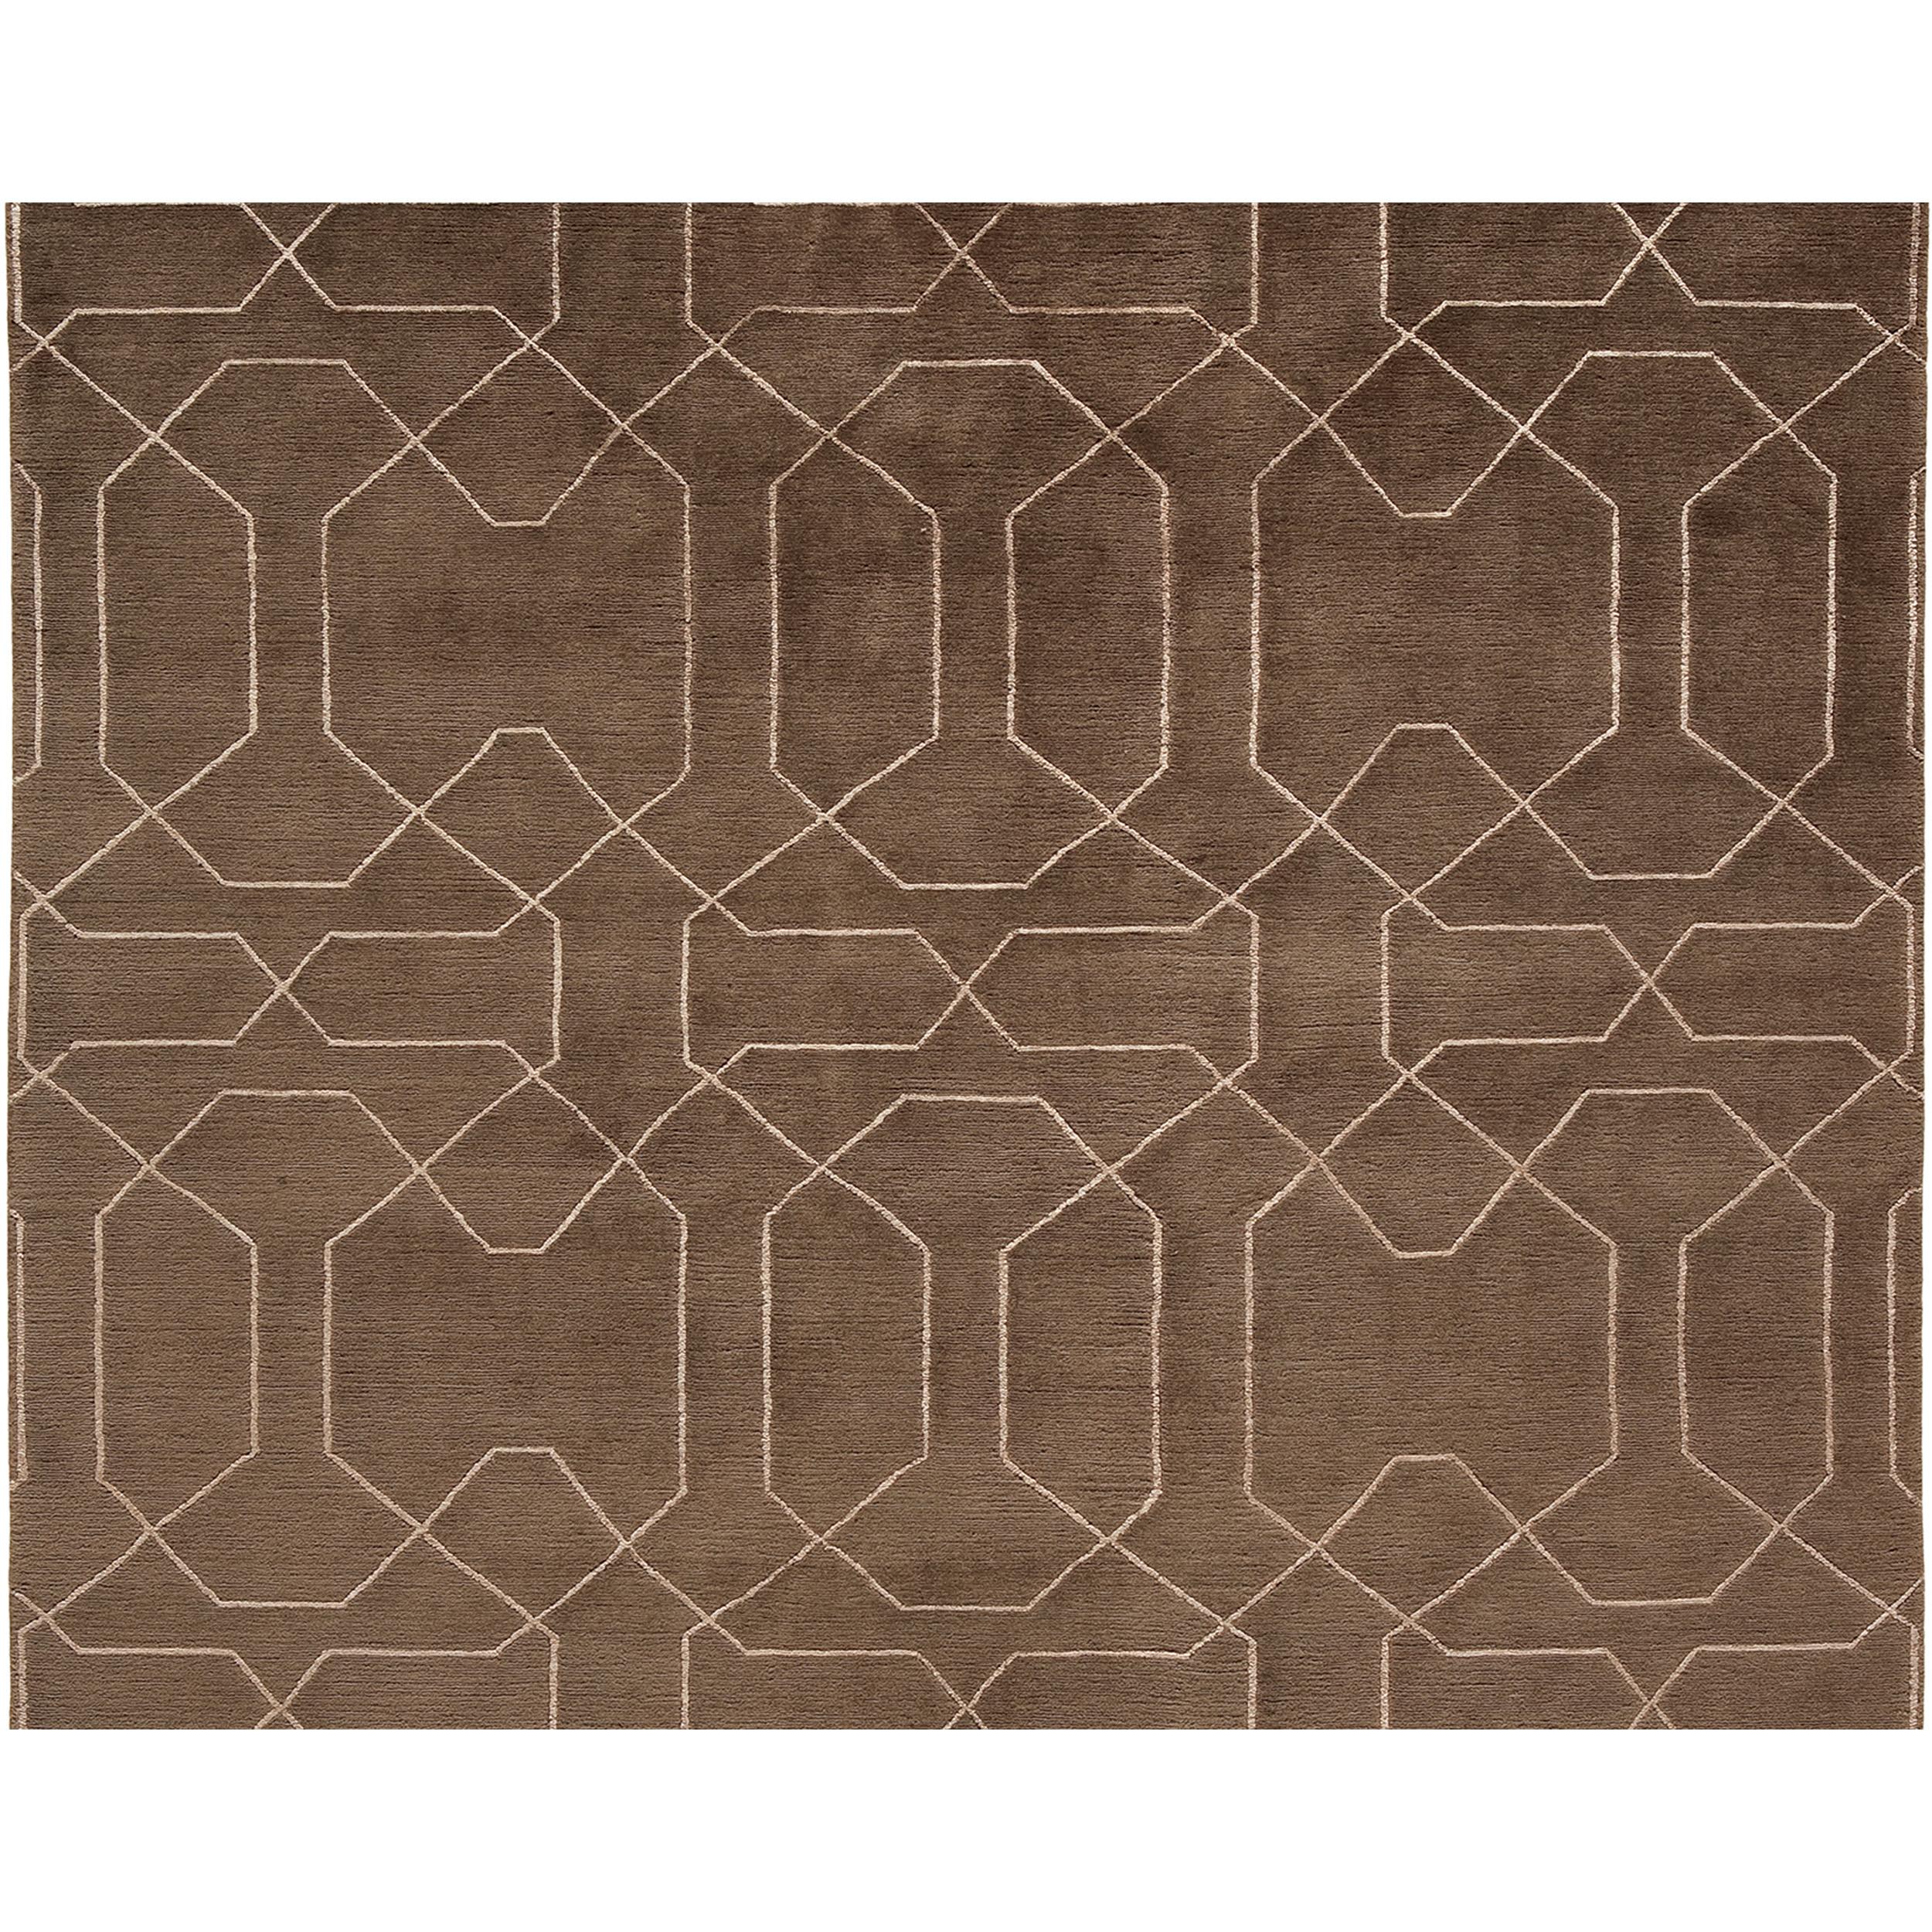 Indian Luxury Modern Hand-Knotted Honeycomb Chocolate 12x15 Rug For Sale